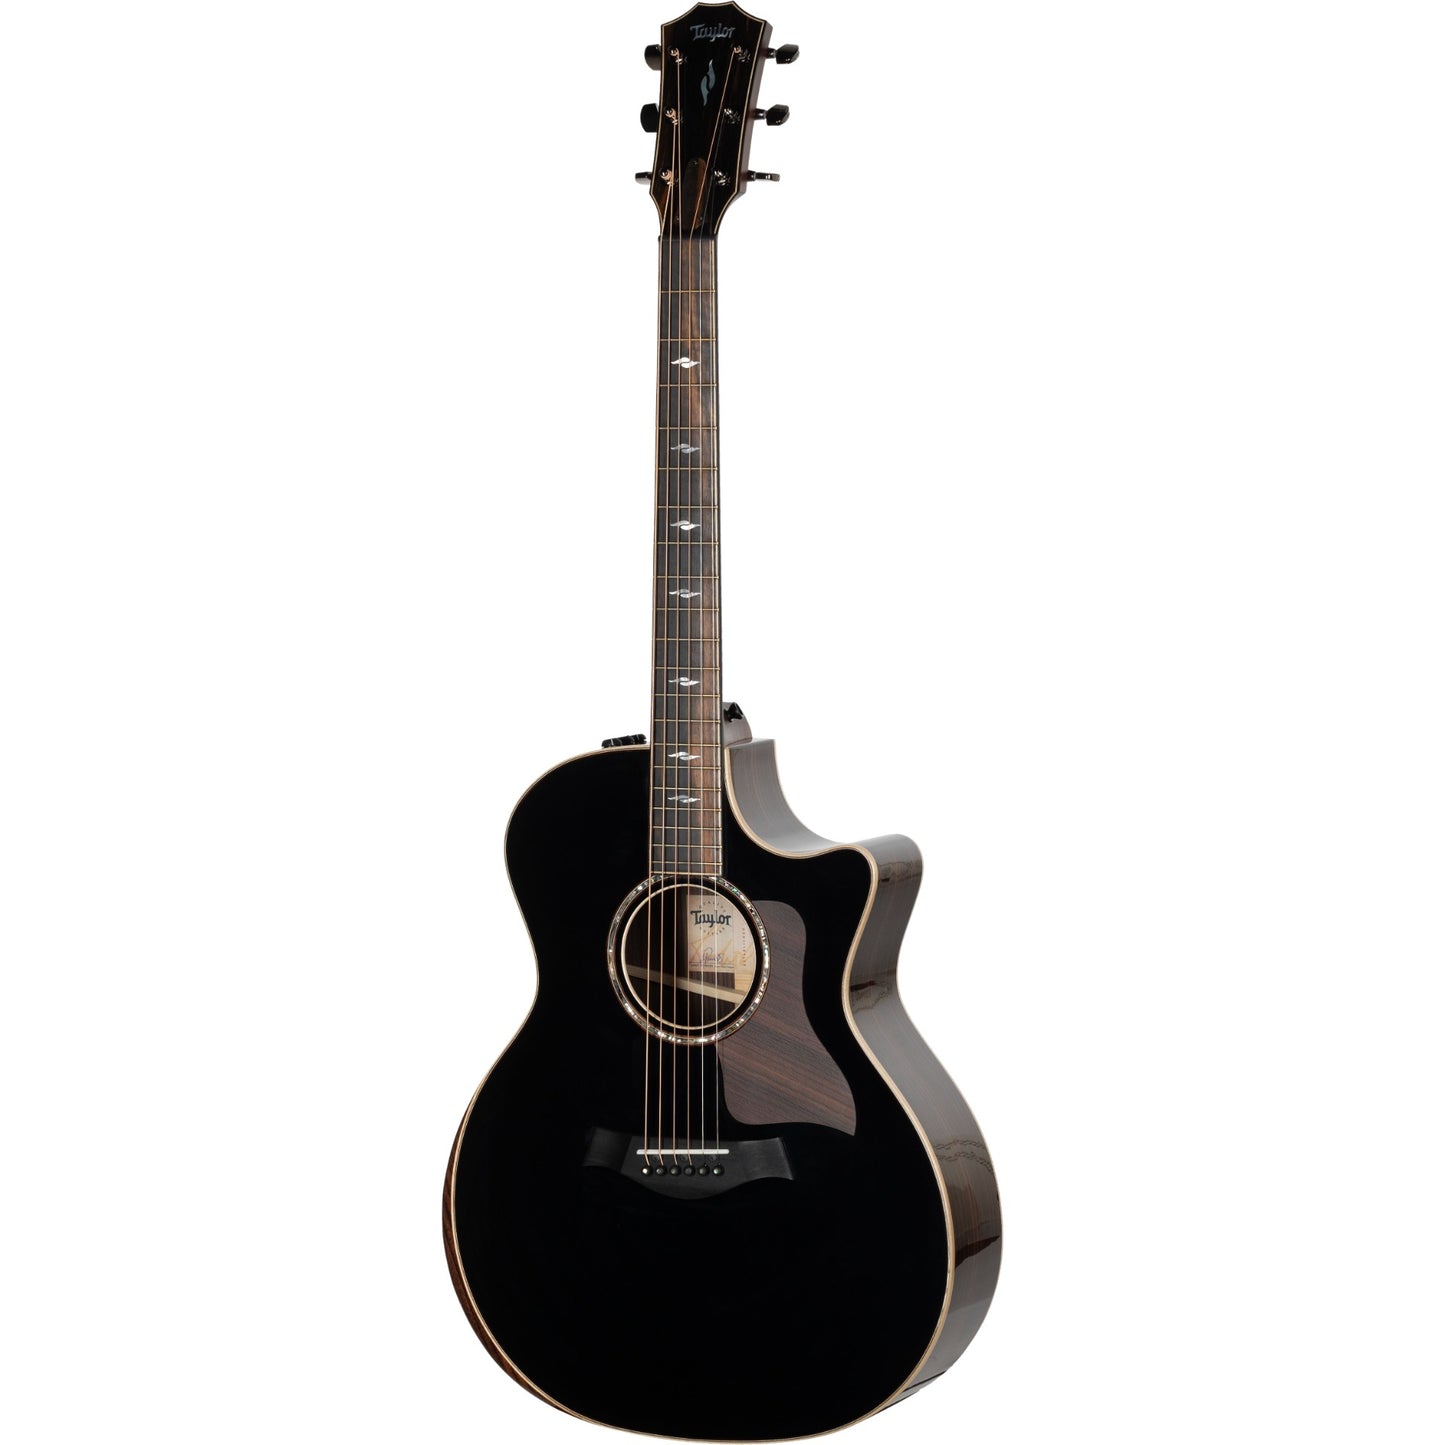 Taylor Limited Edition 814ce Acoustic Electric Guitar - Blacktop